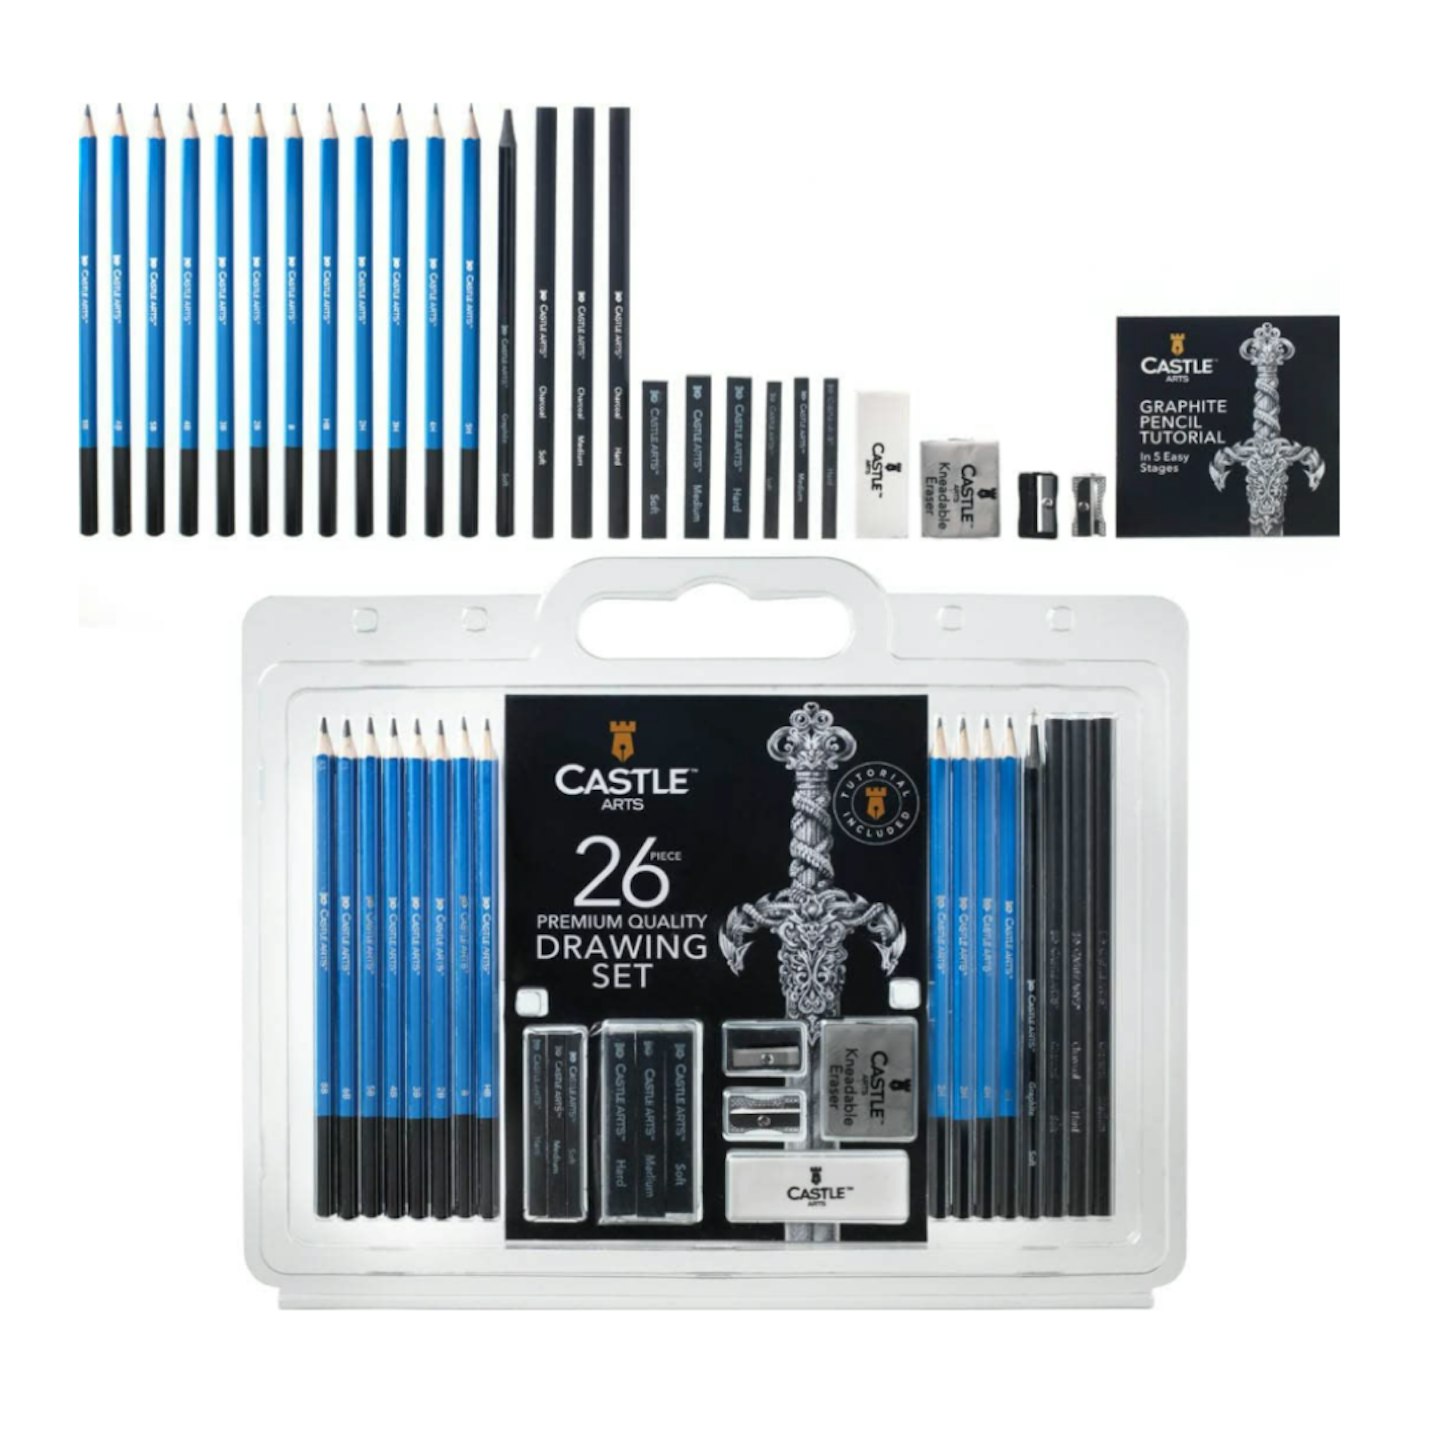 Castle Art Supplies 26 Piece Premium Drawing and Sketching Set